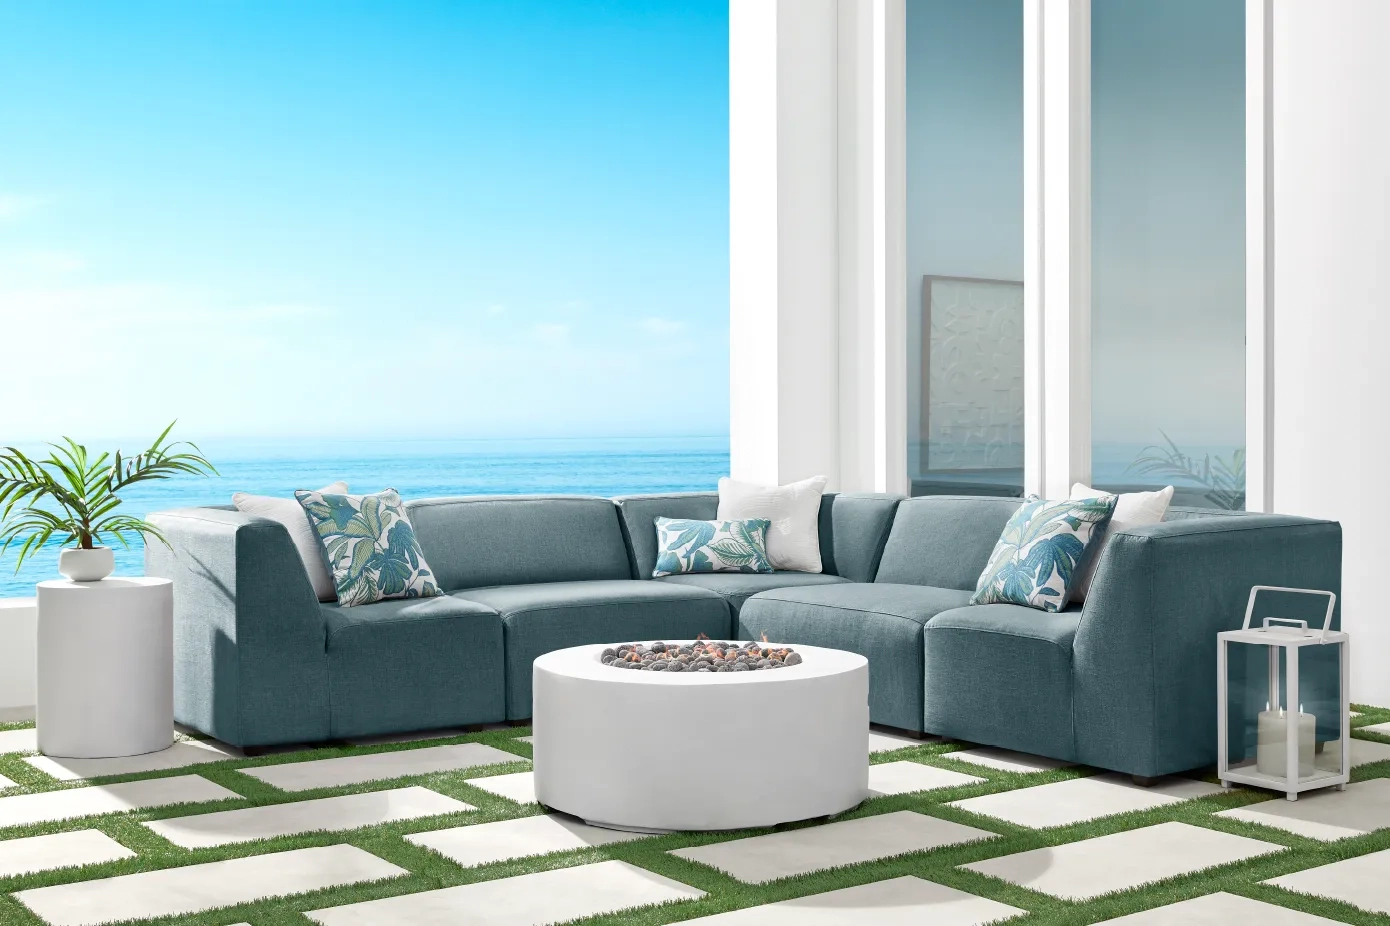 Patio Sectional Sets